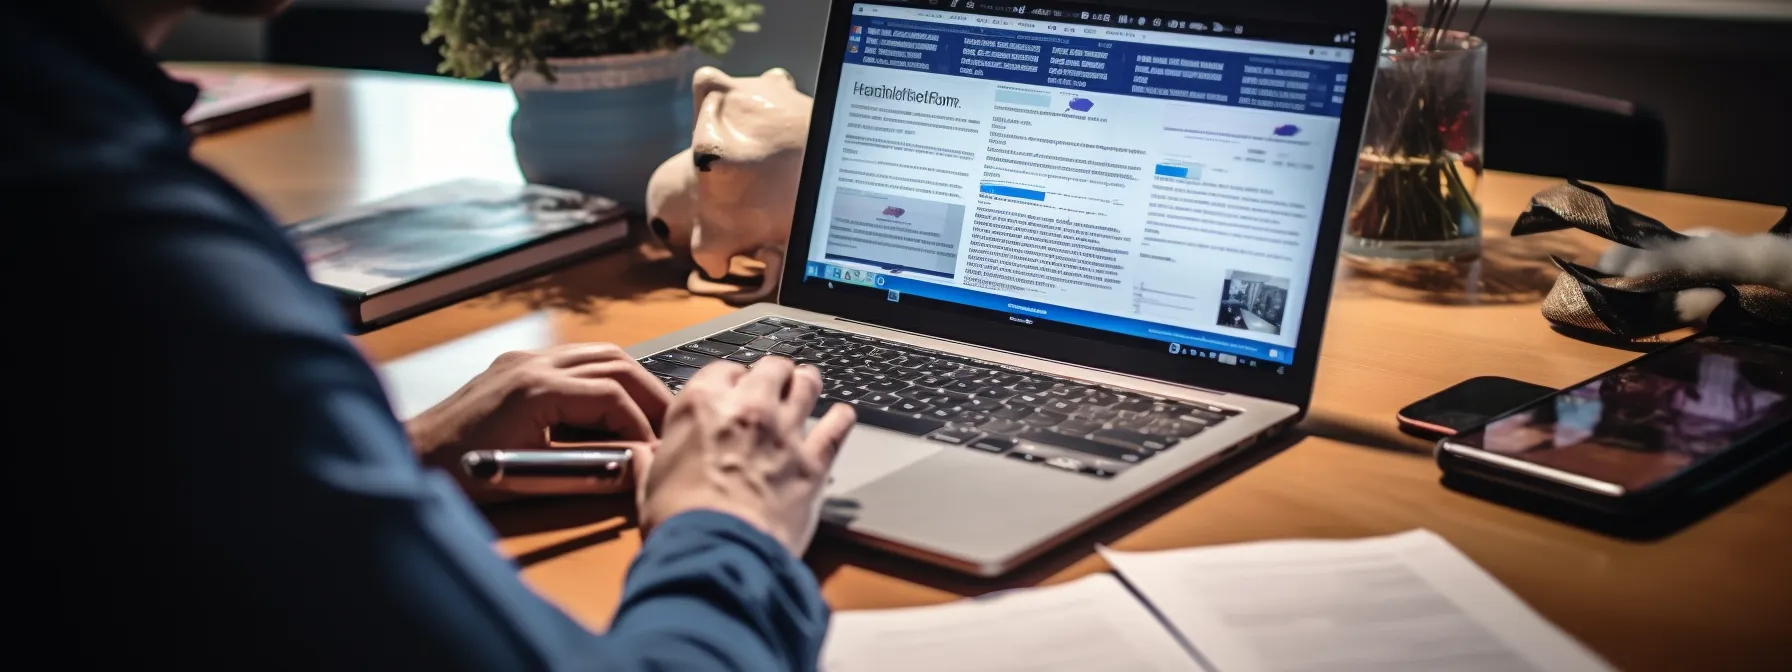 a person taking notes and studying a comprehensive seo training course on a laptop, with seo materials and books surrounding them.